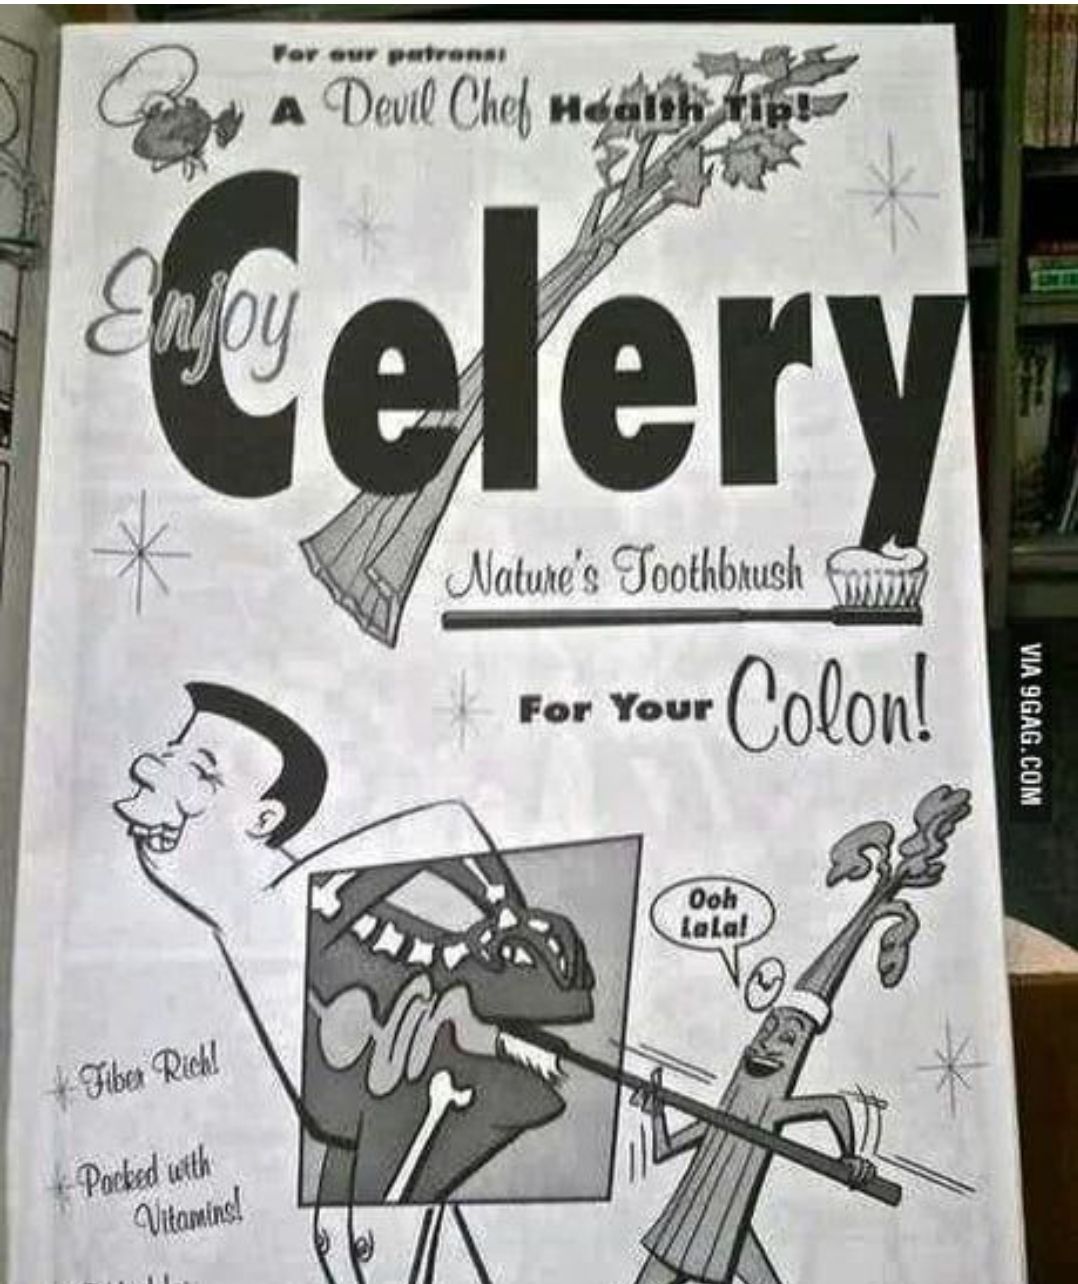 Enjoy Celery, natures toothbrush apparently!